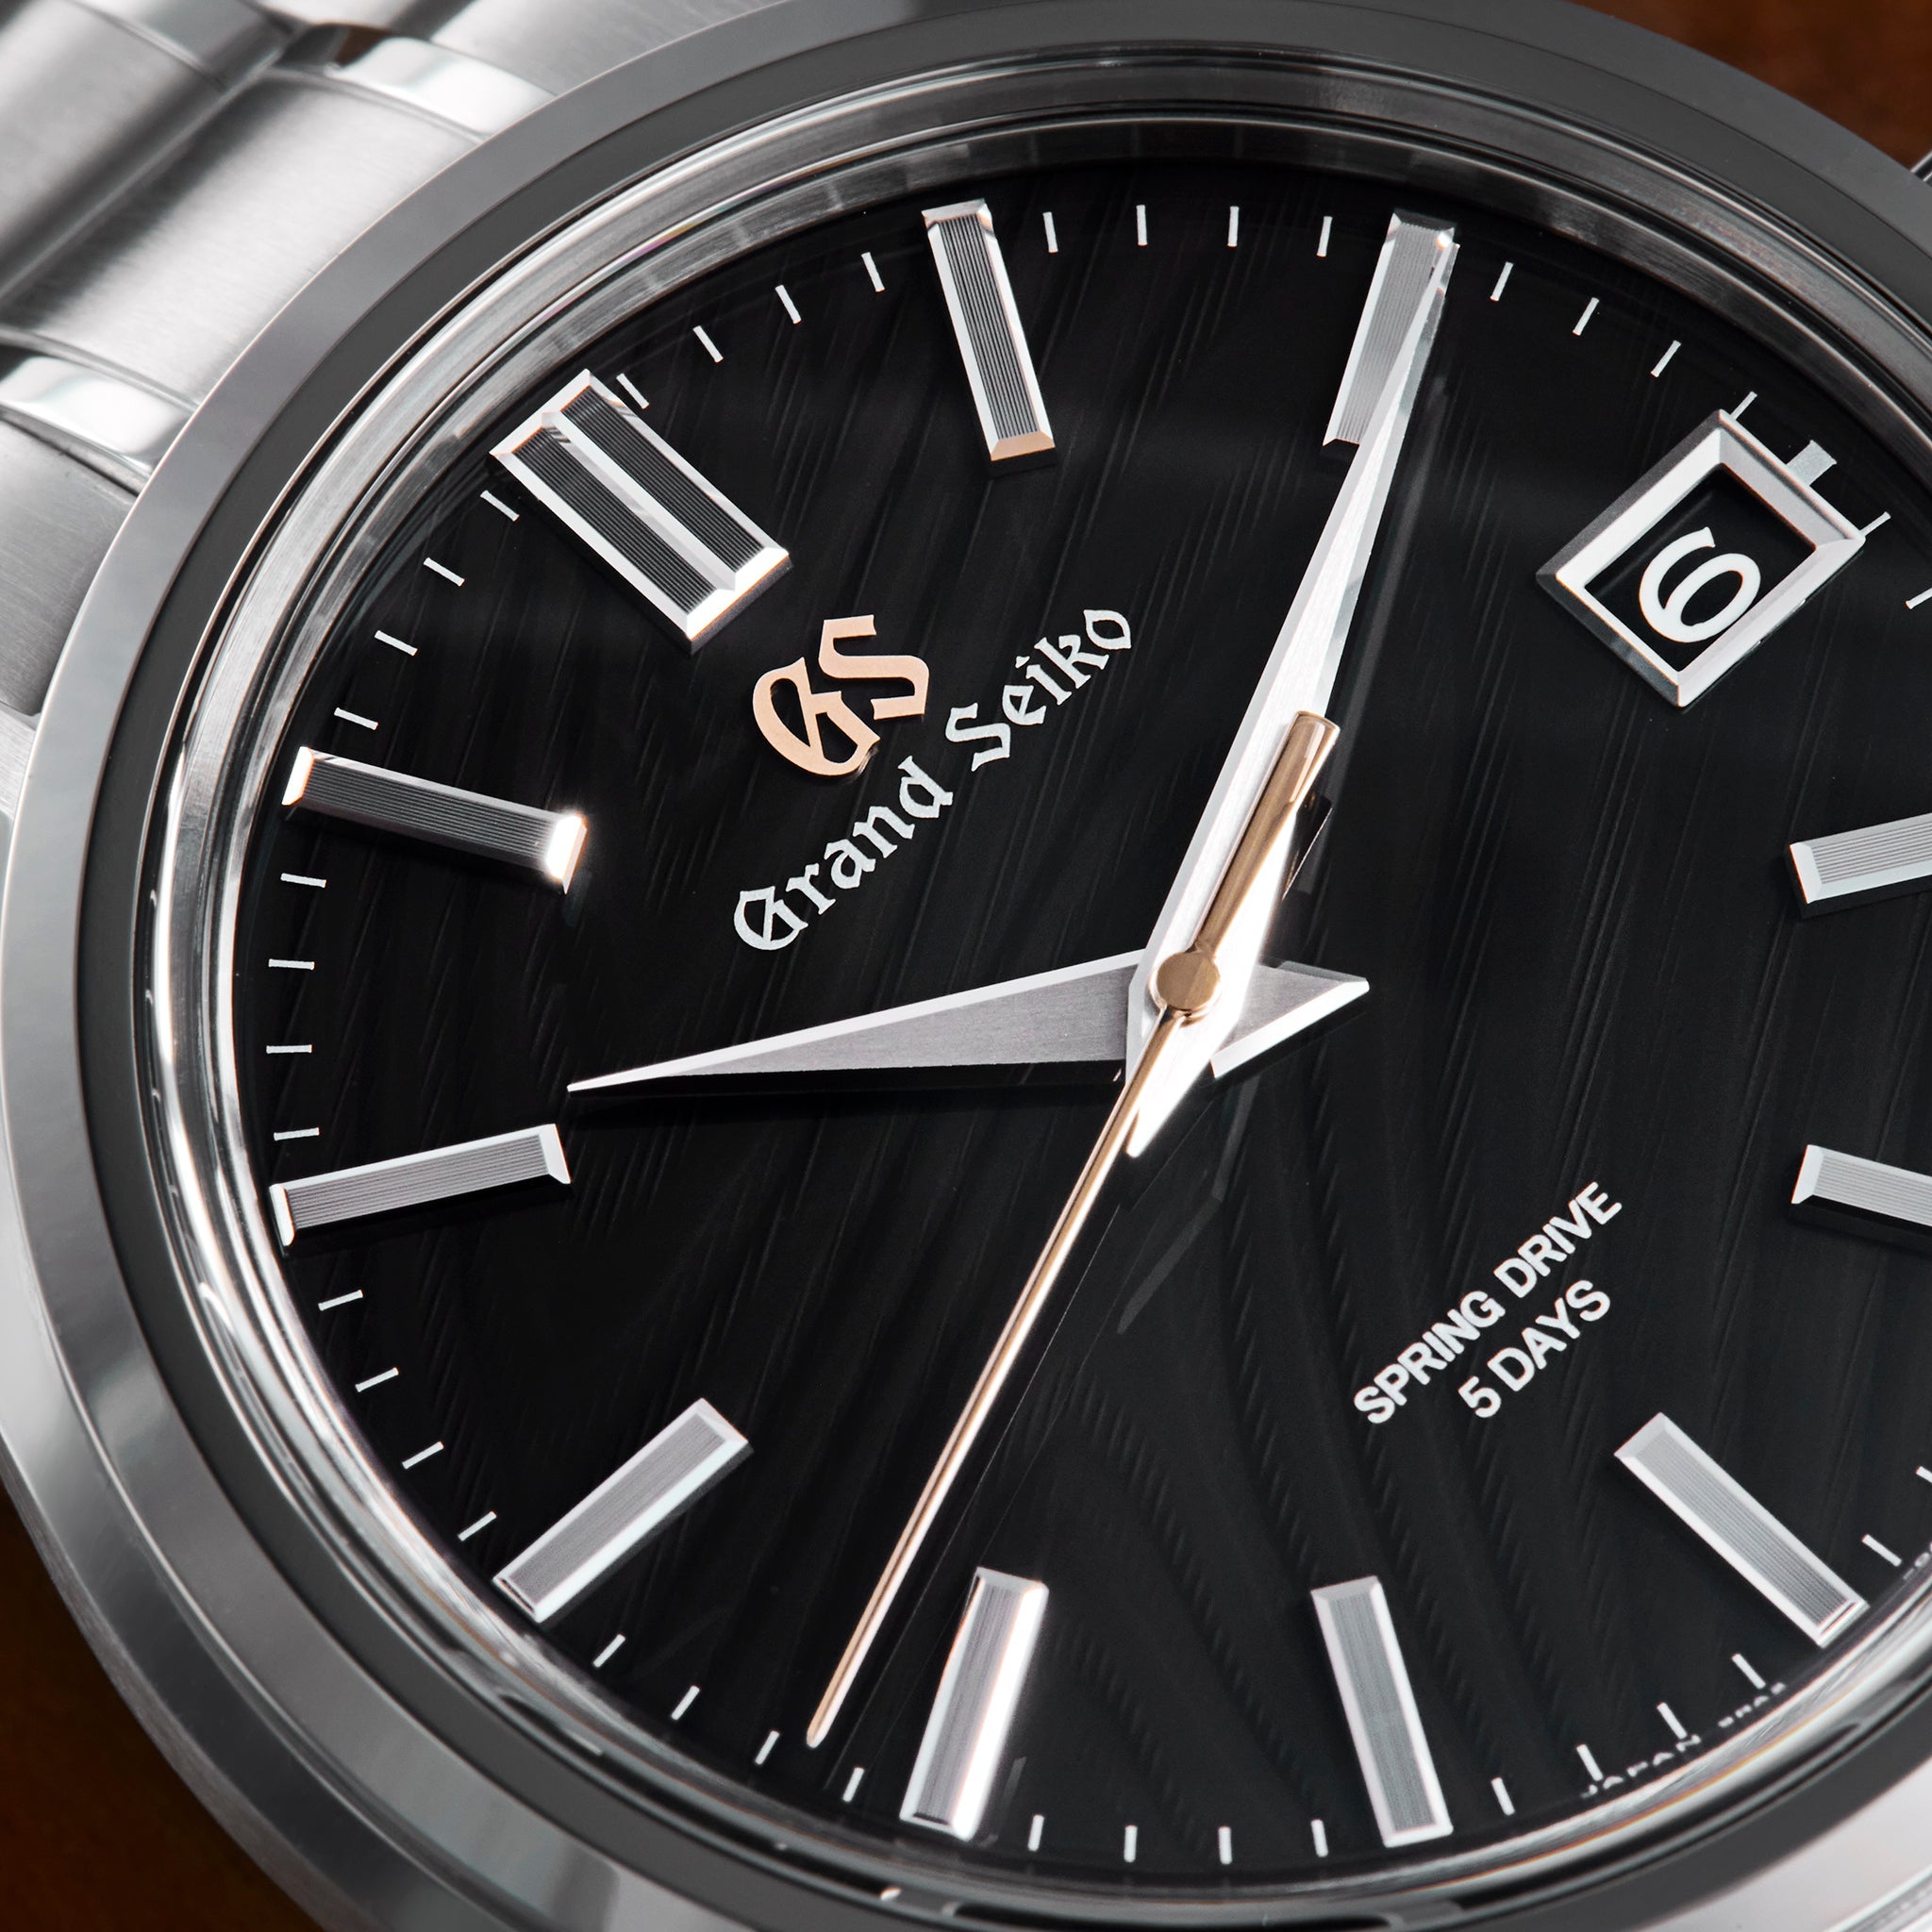 Spring Drive Automatic Date Limited Edition “Growth Rings” SLGA013 – Watch  Collectiv